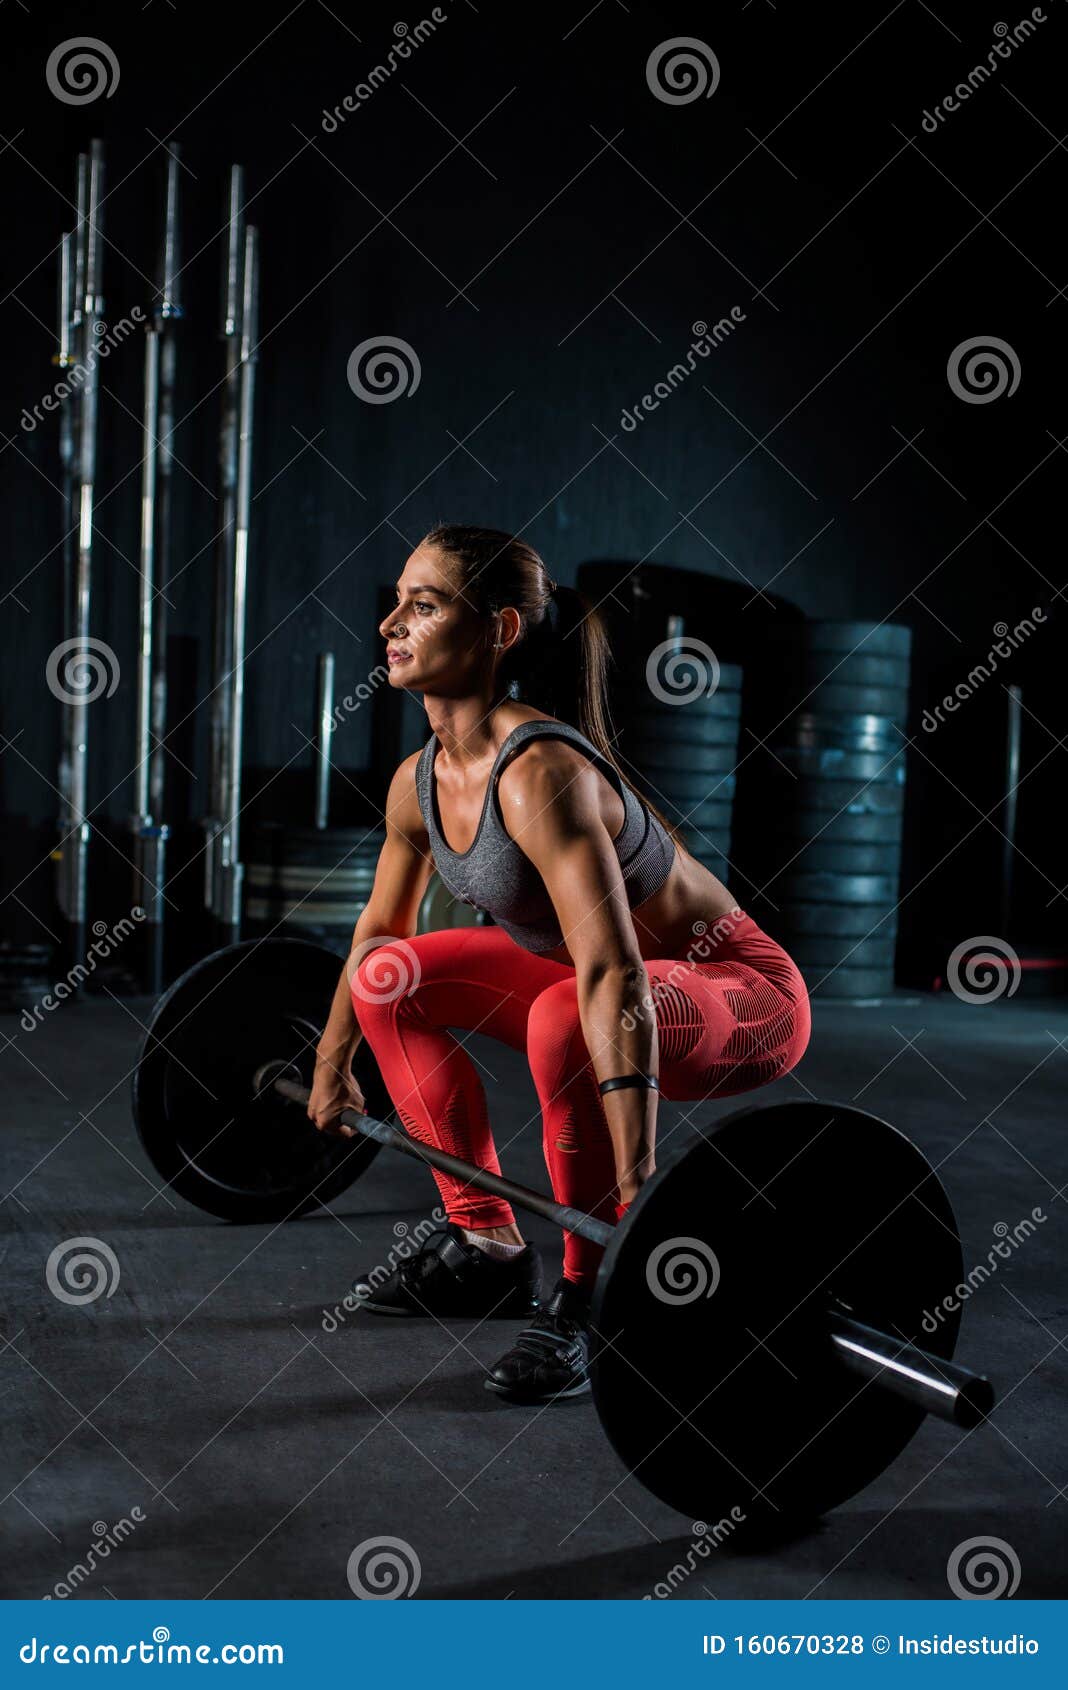 Young, European, Muscular Girl in Red Leggings, Doing Exercise with a ...